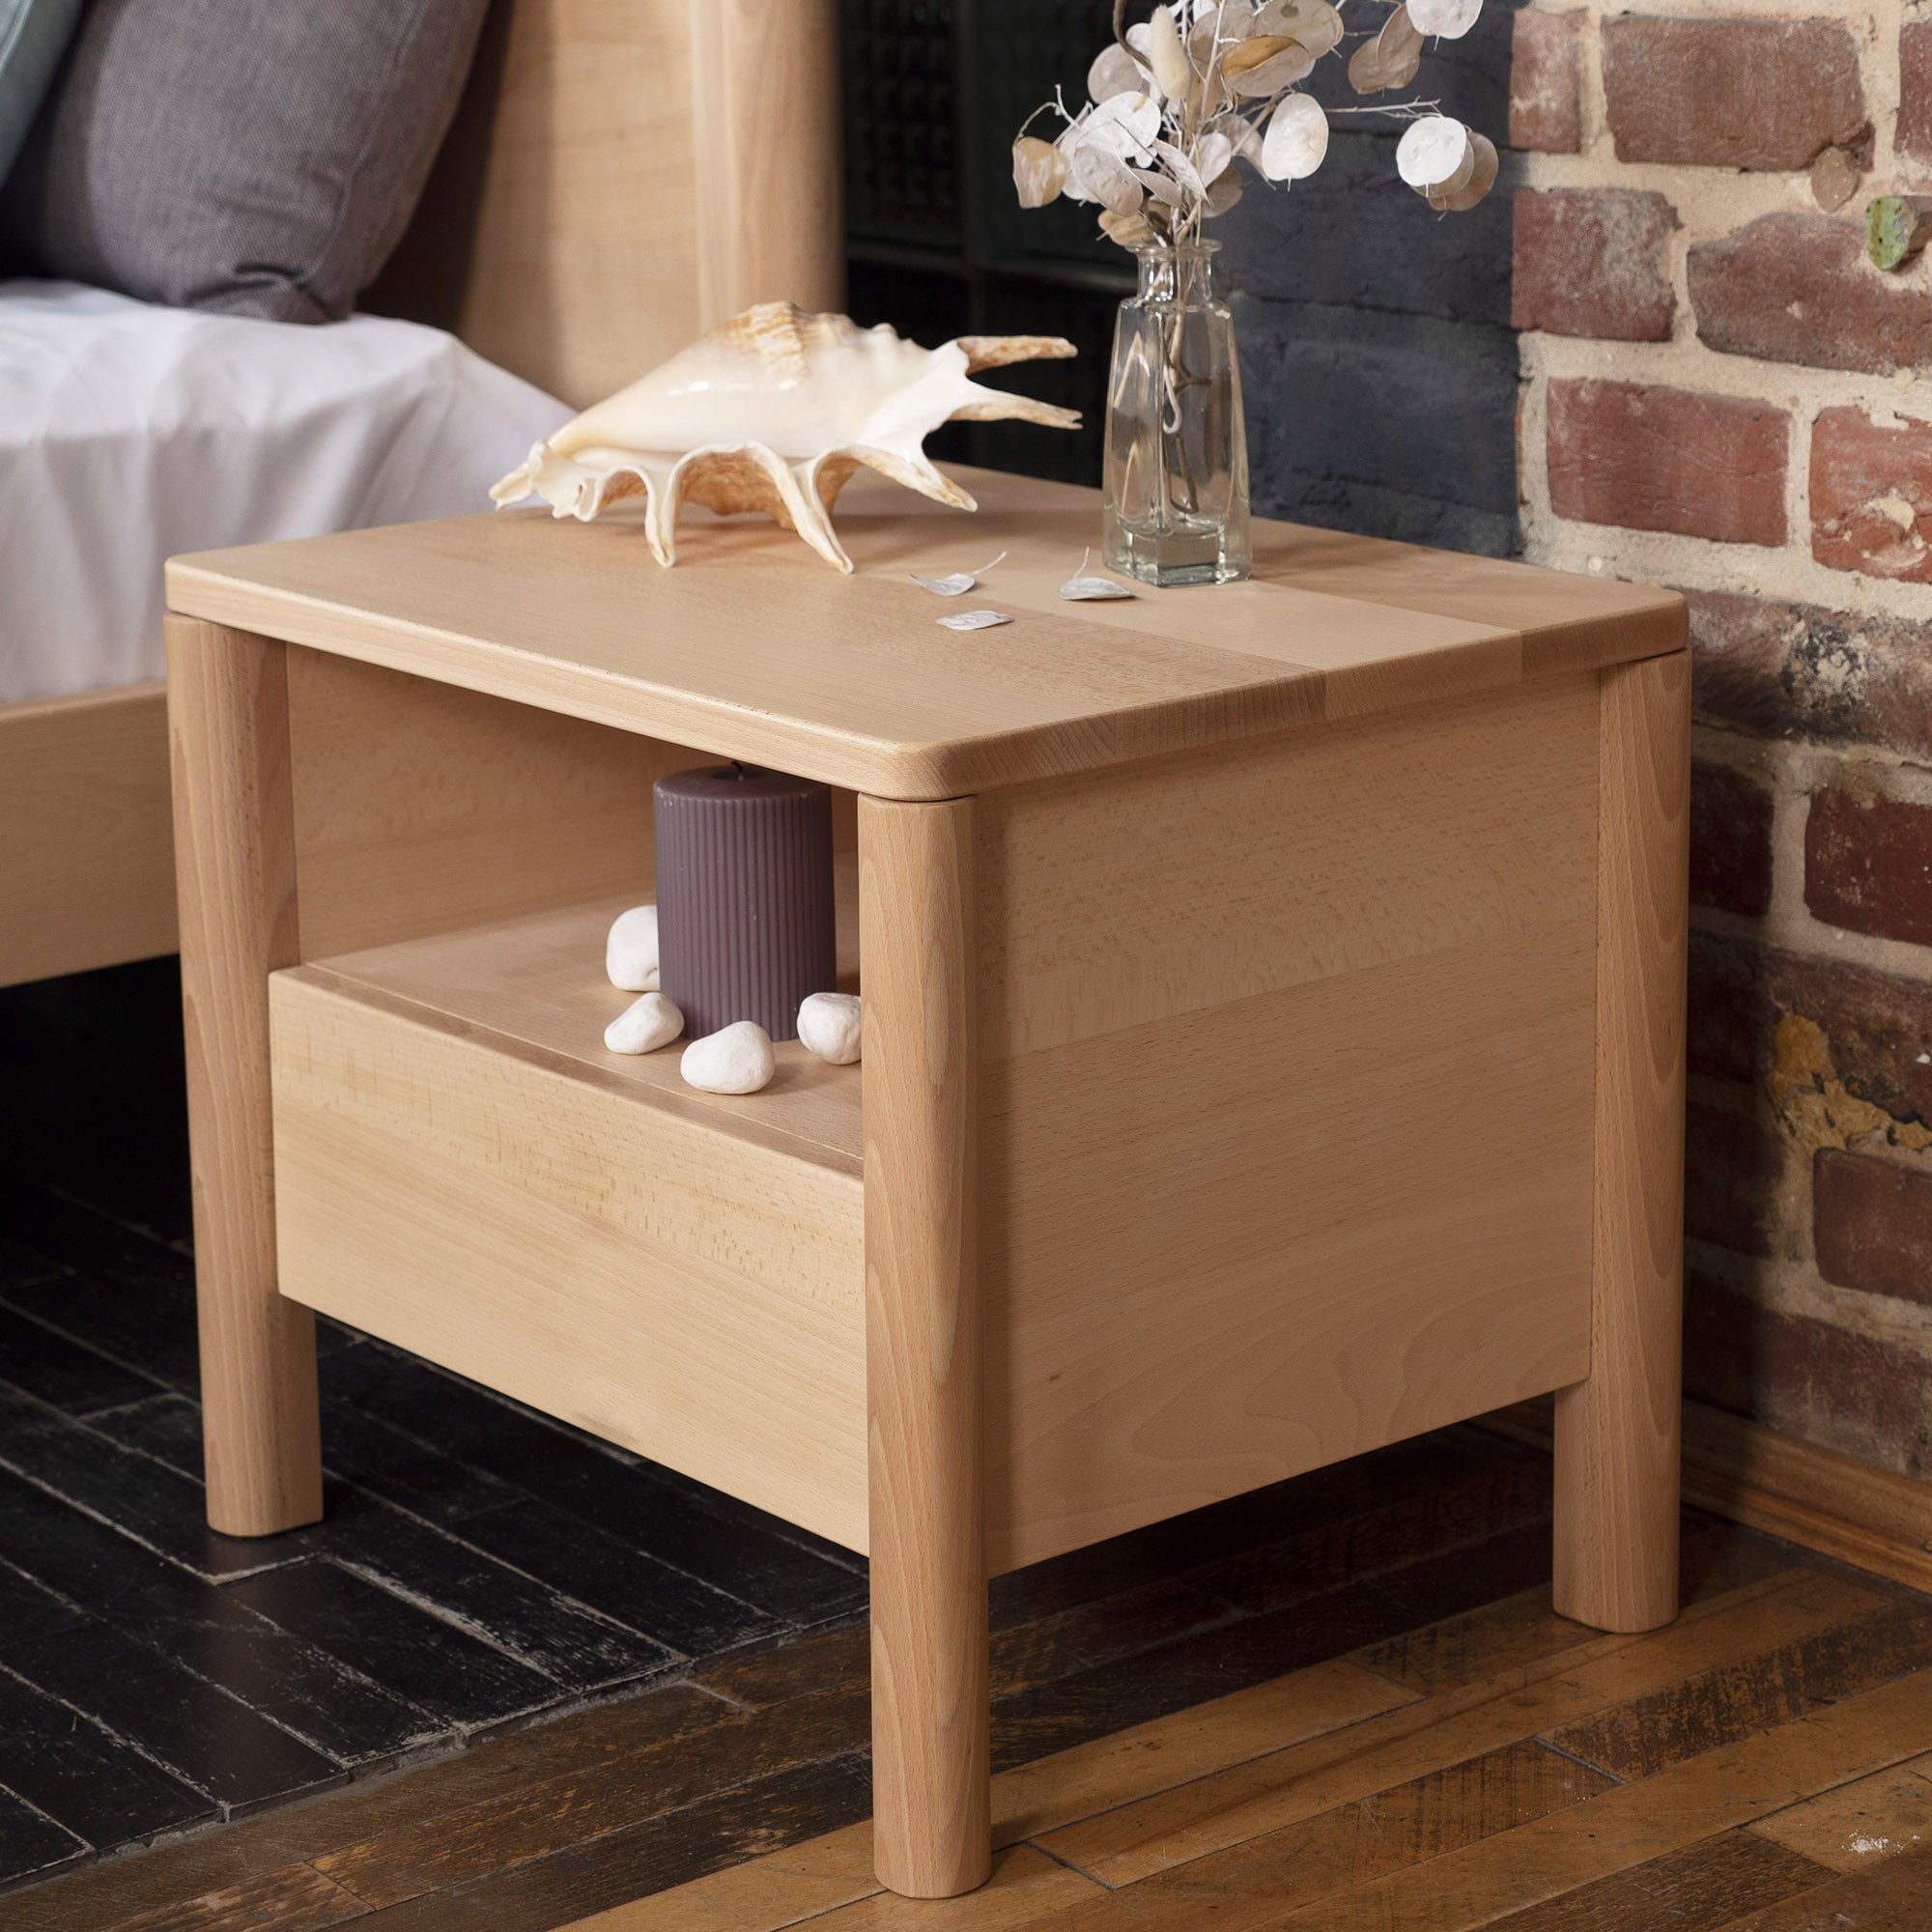 DROP Bedside Table, Beech Wood without doors natural colour-interior view